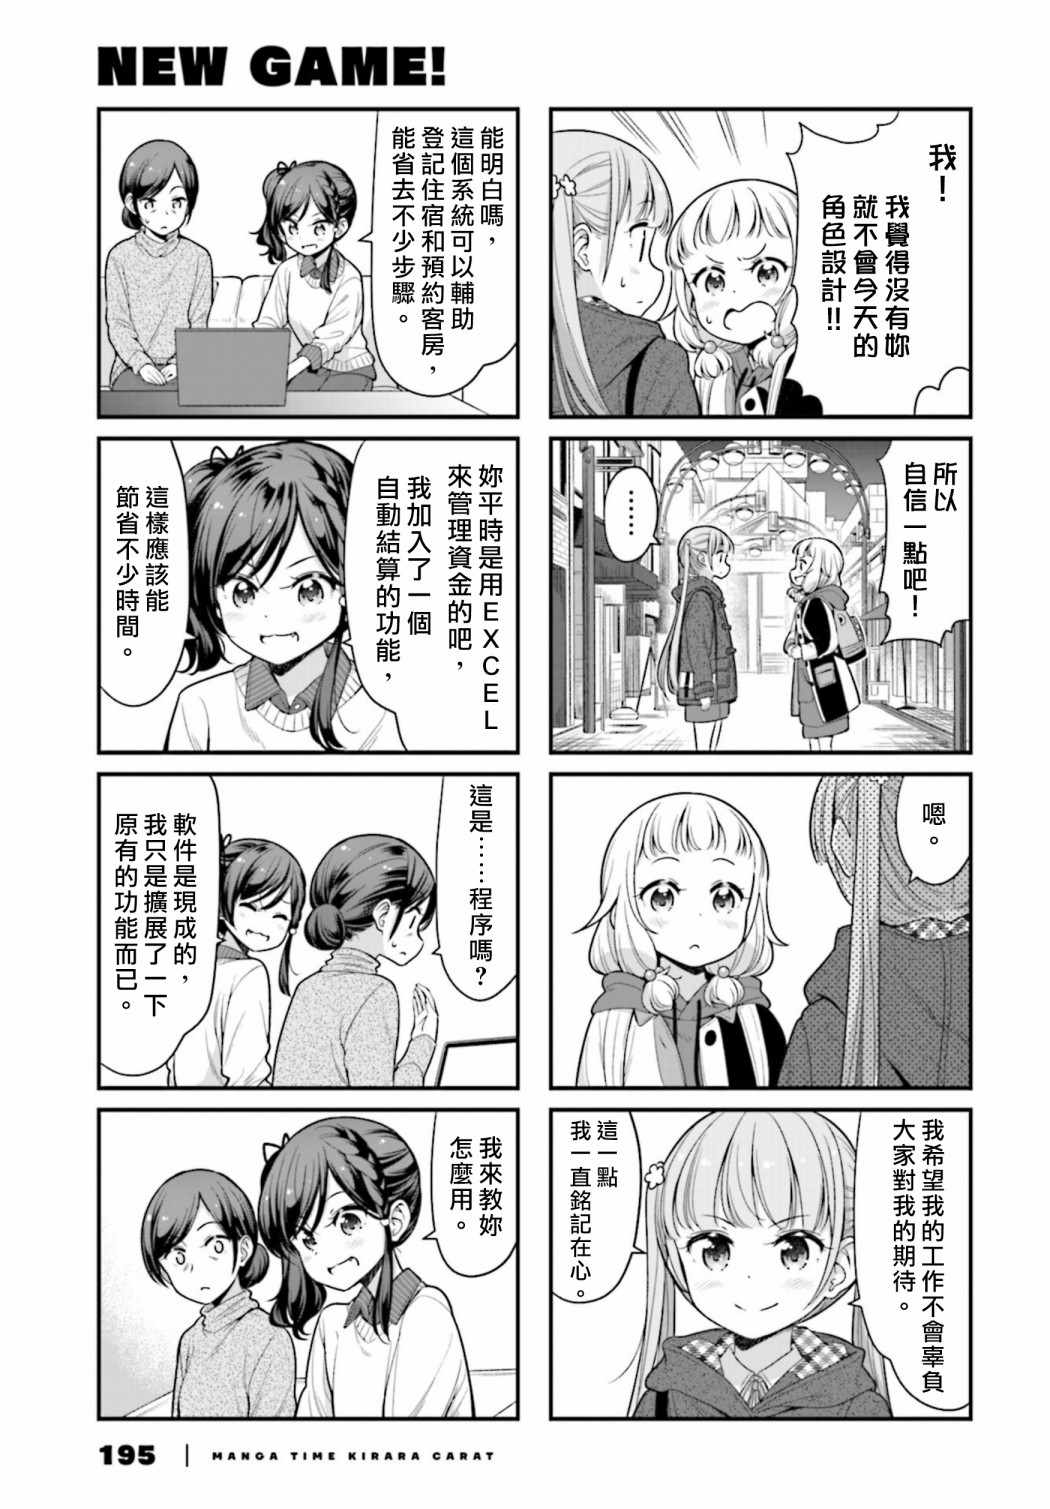 《New Game!》漫画 New Game 132集